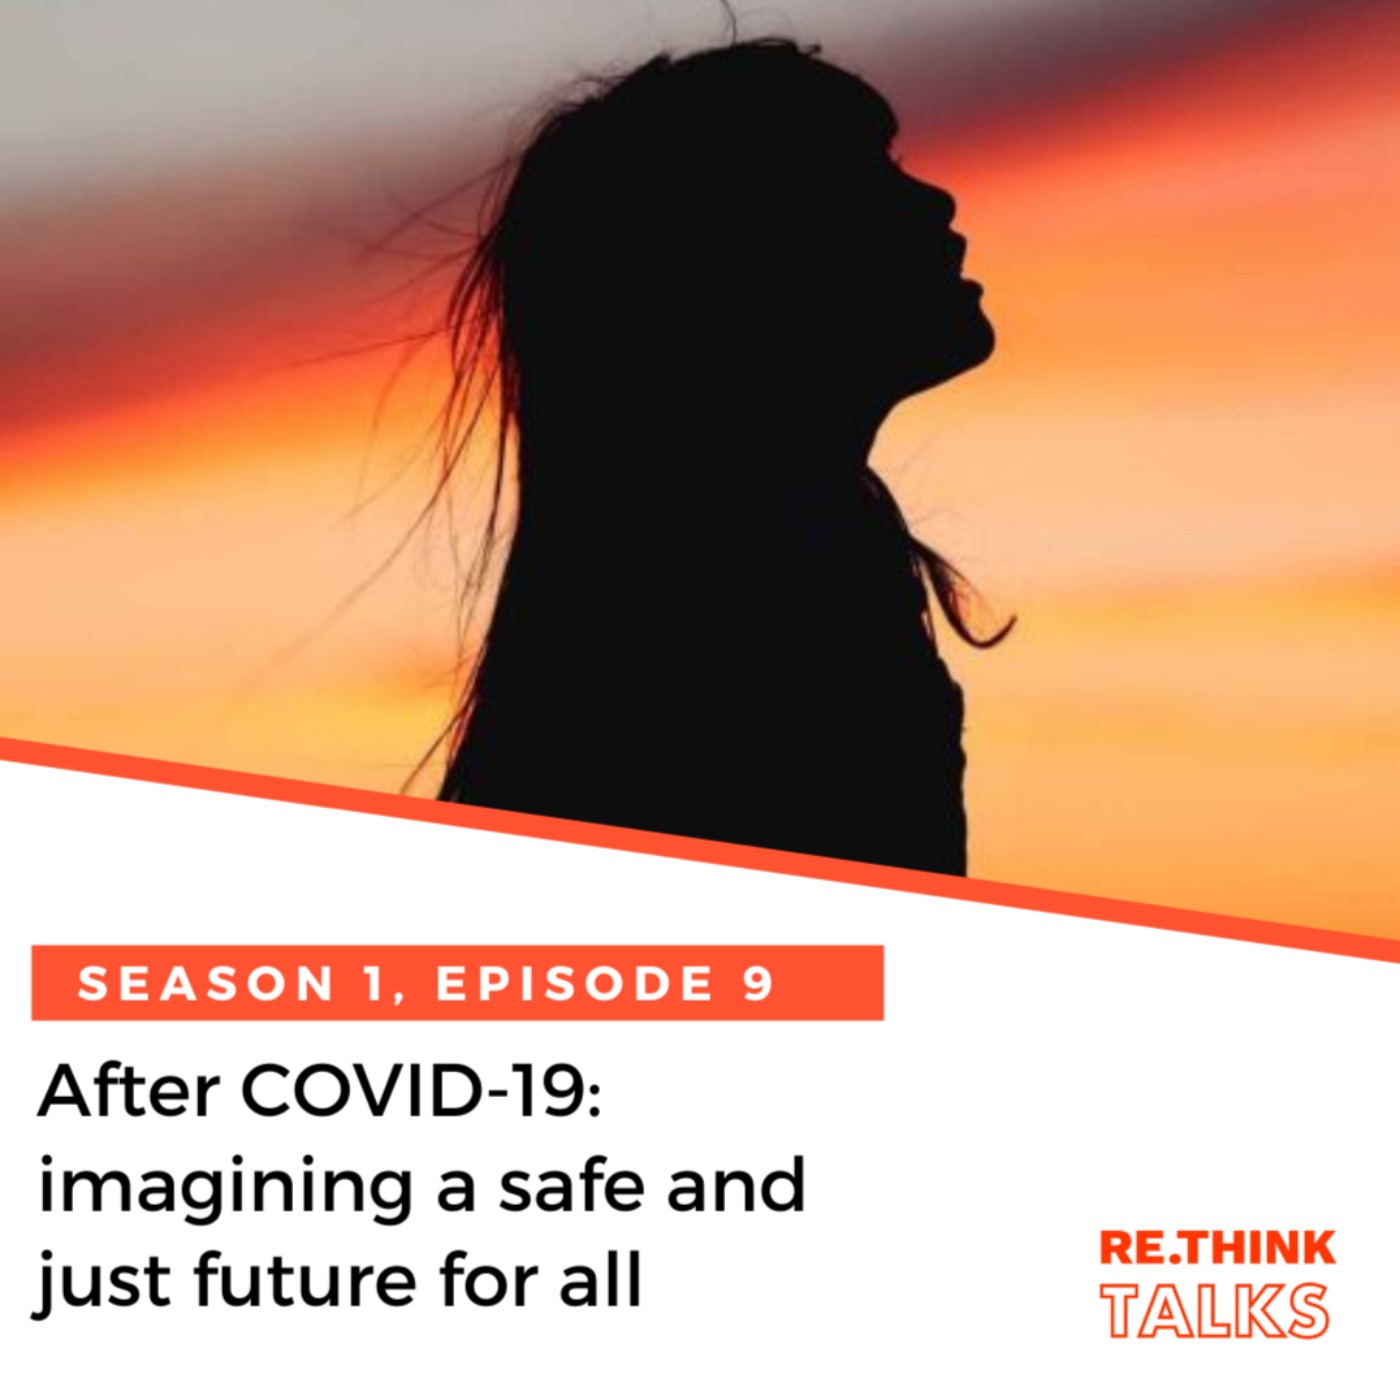 After COVID-19: imagining a safe and just future for all